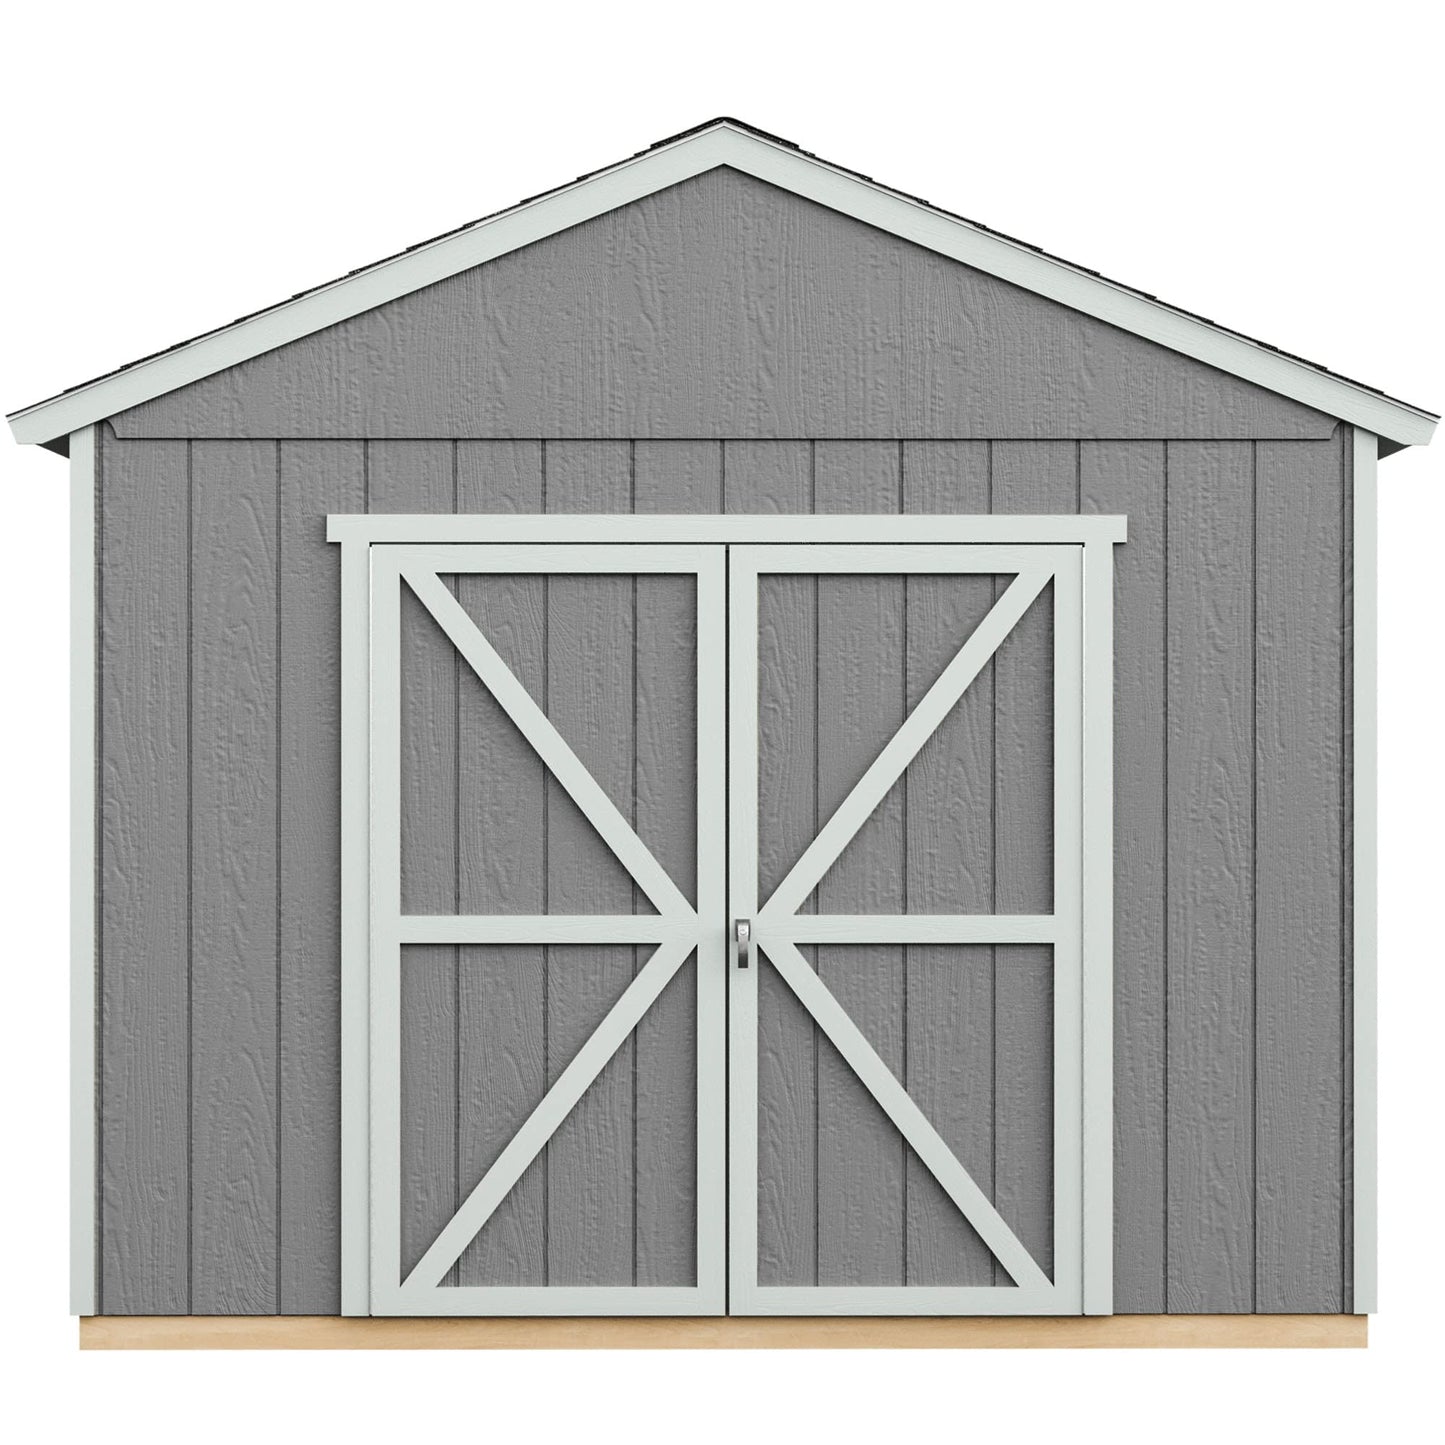 Handy Home Products Rookwood 10x10 Do-It-Yourself Wooden Storage Shed Brown Without Floor